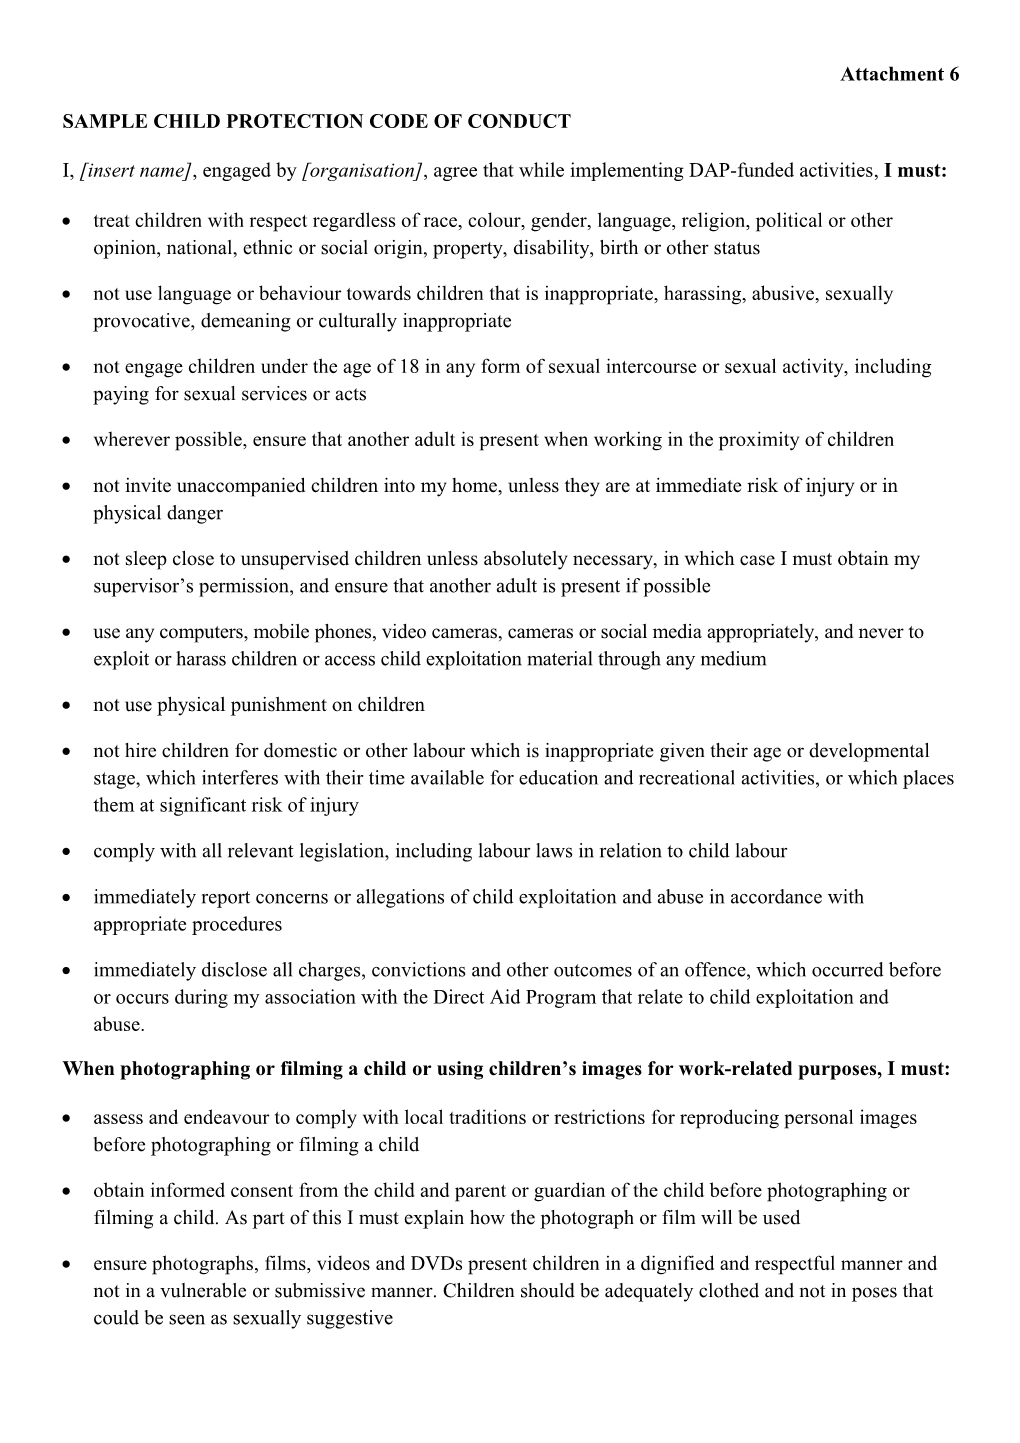 Sample Child Protection Code of Conduct